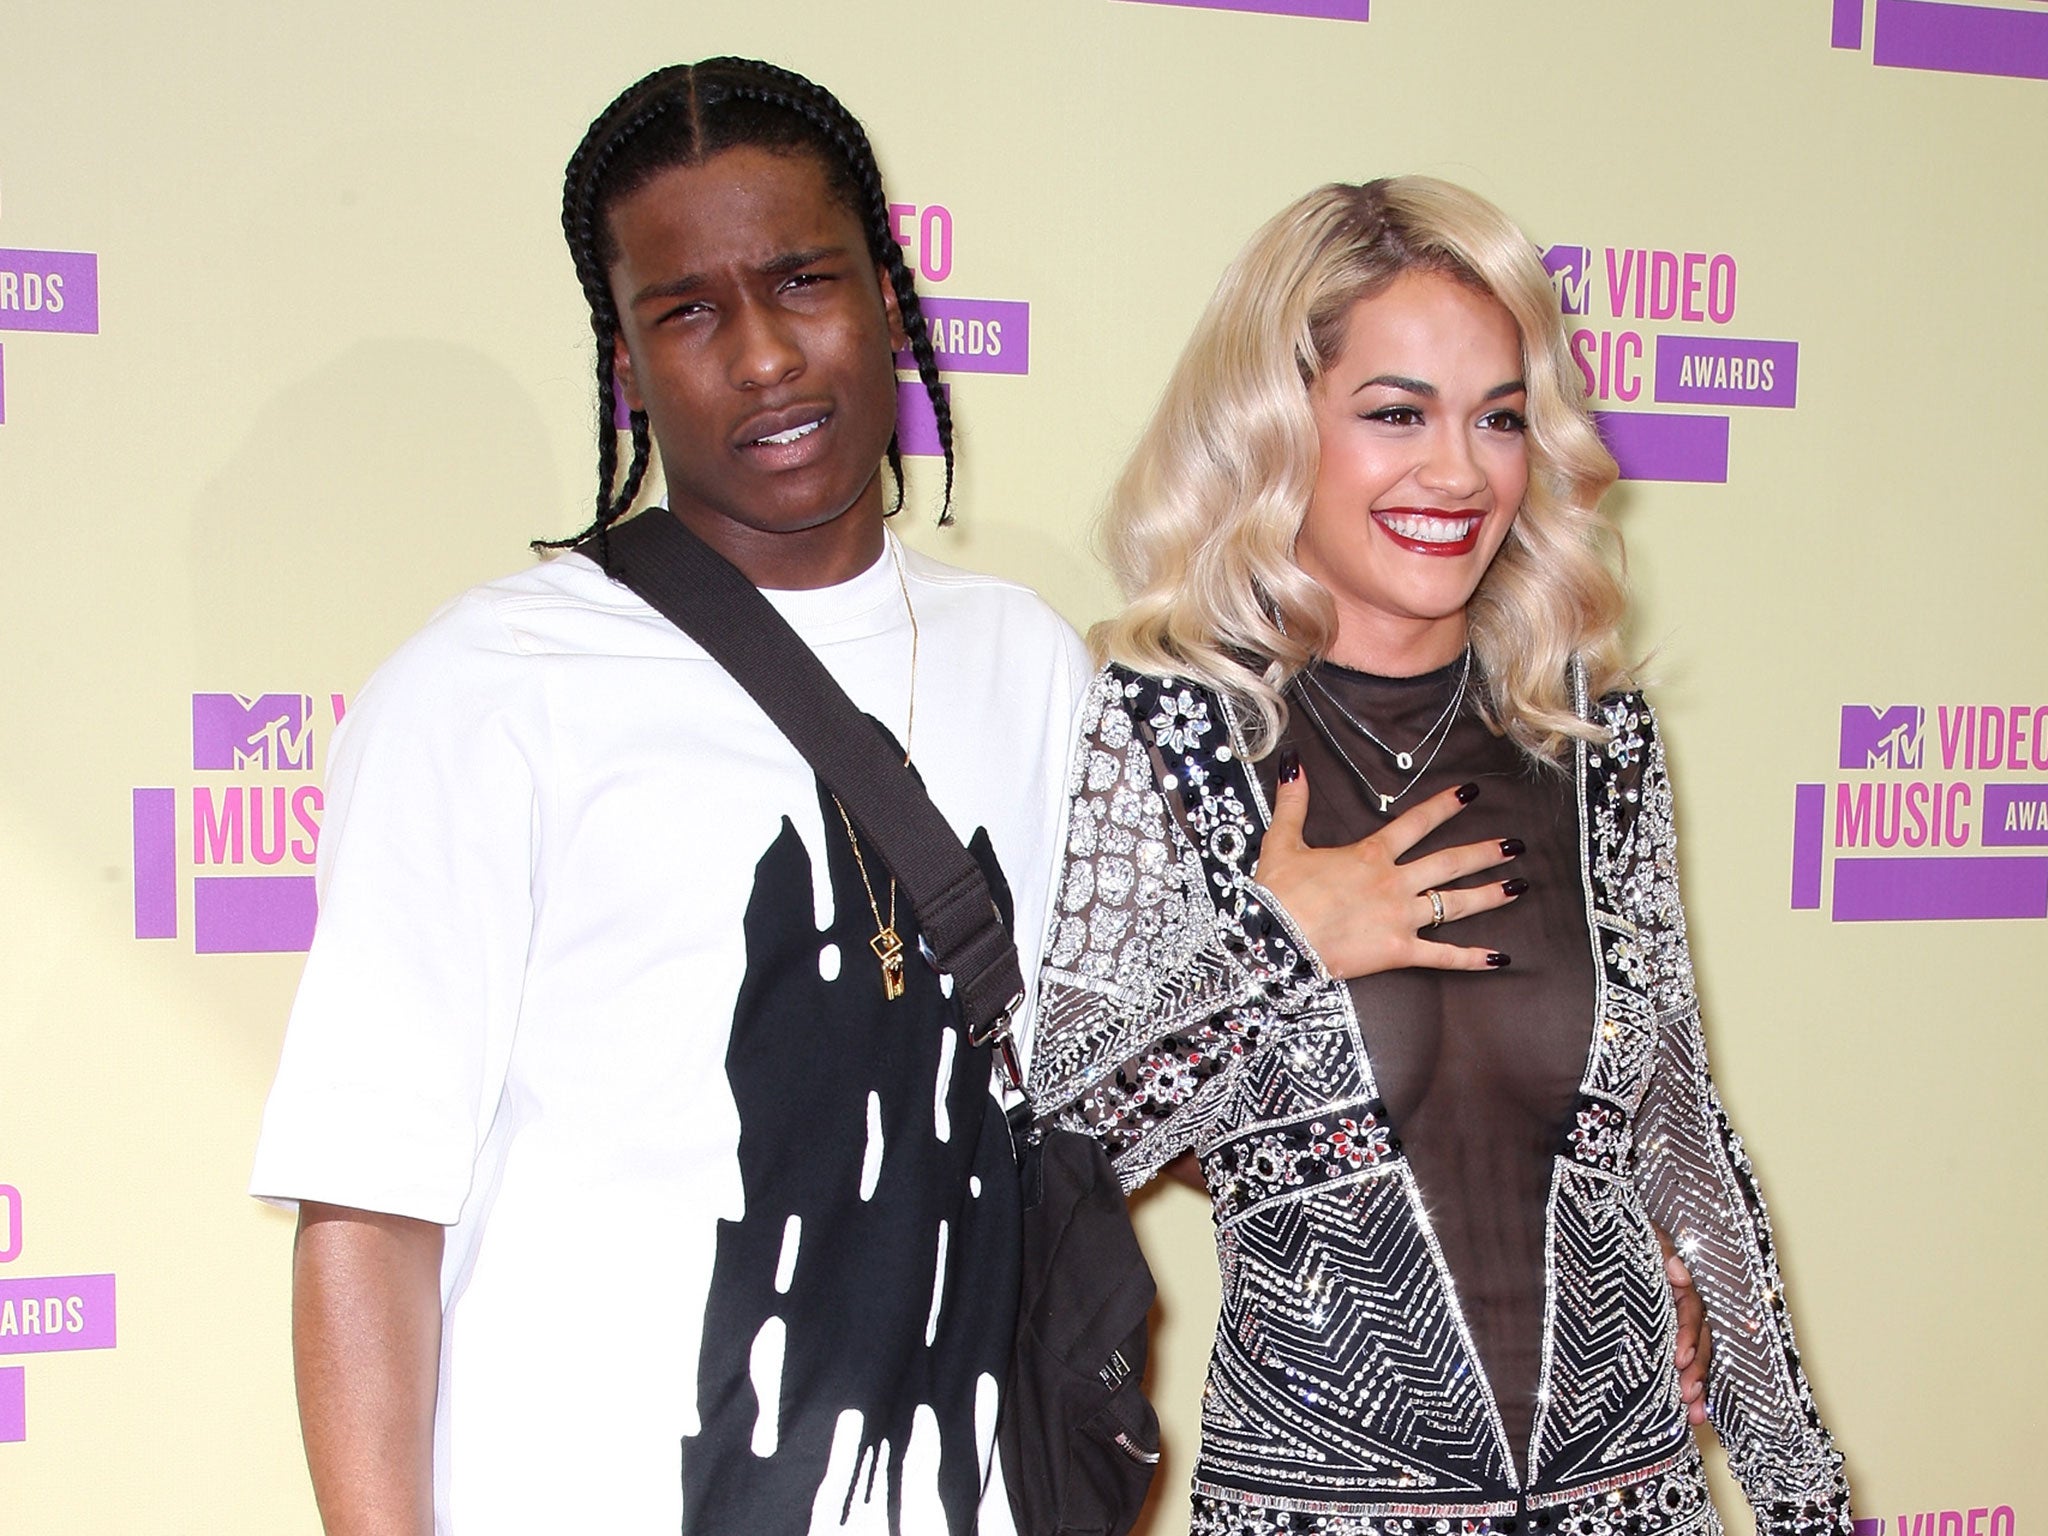 A$AP Rocky and Rita Ora pictured together at the MTV Video Music Awards in 2012